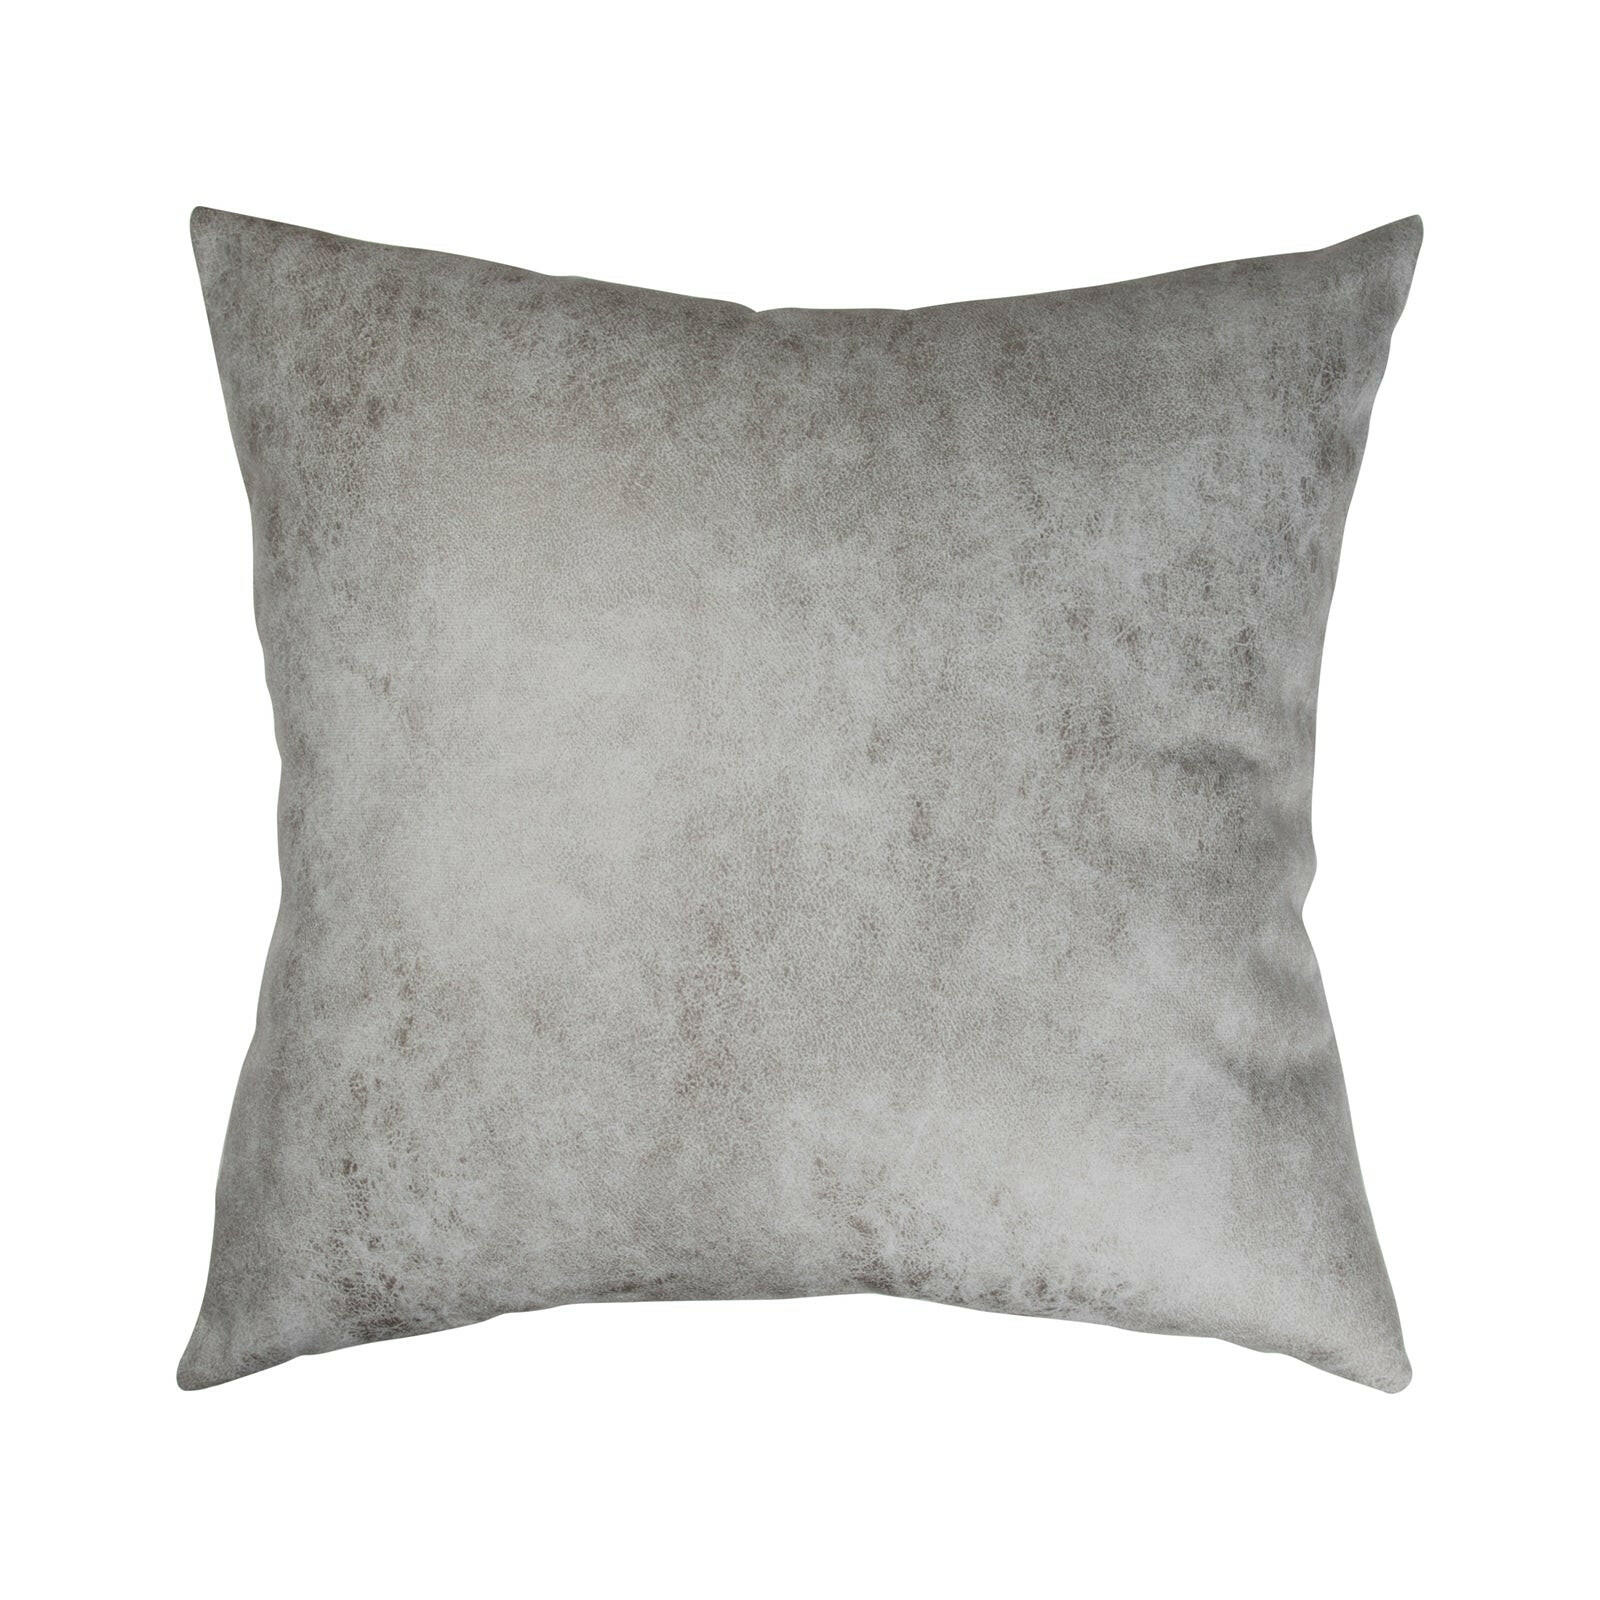 Grey Vegan Leather Sublimation Pillow Cases - 4 Pack.